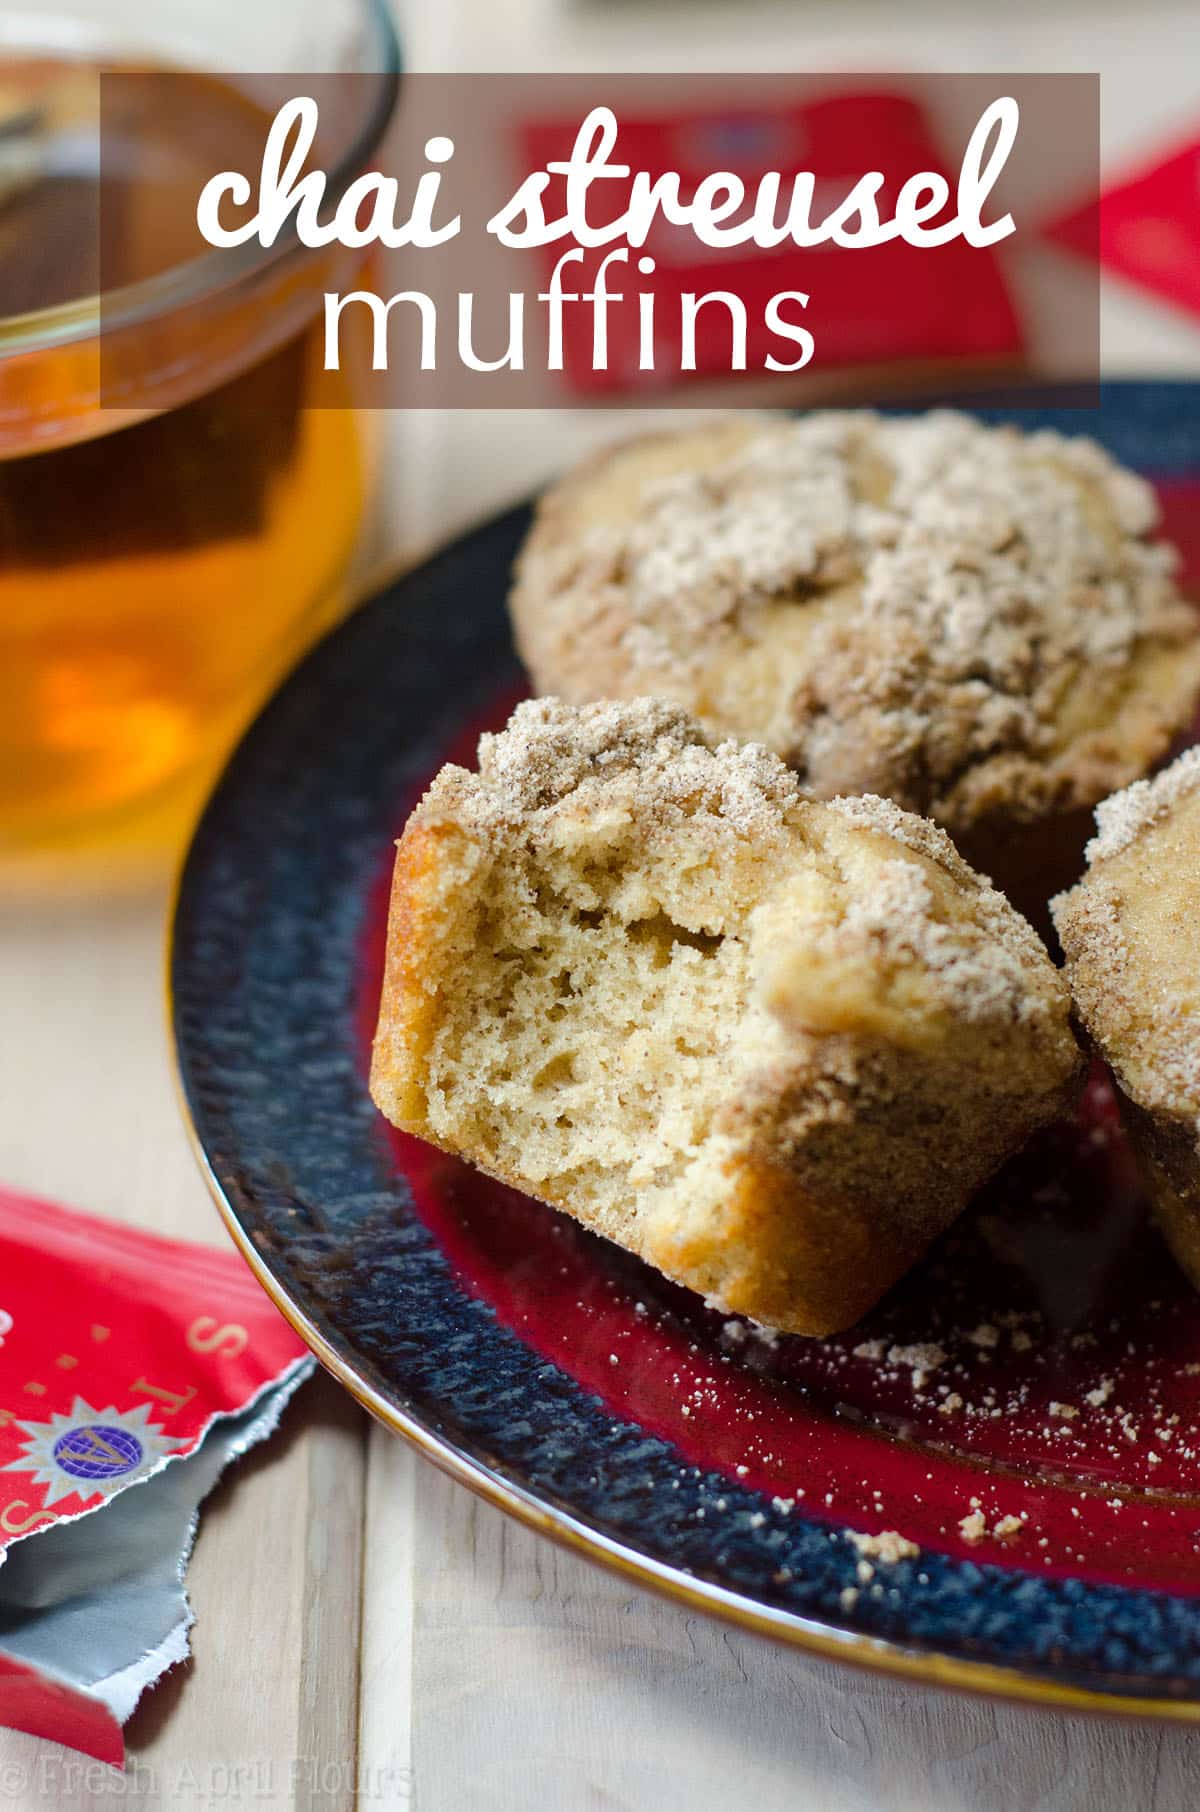 Chai Spiced Muffins: Buttery, brown sugar muffins spiced with cardamom and topped with a chai spiced streusel give a whole new dimension to your morning muffin. via @frshaprilflours